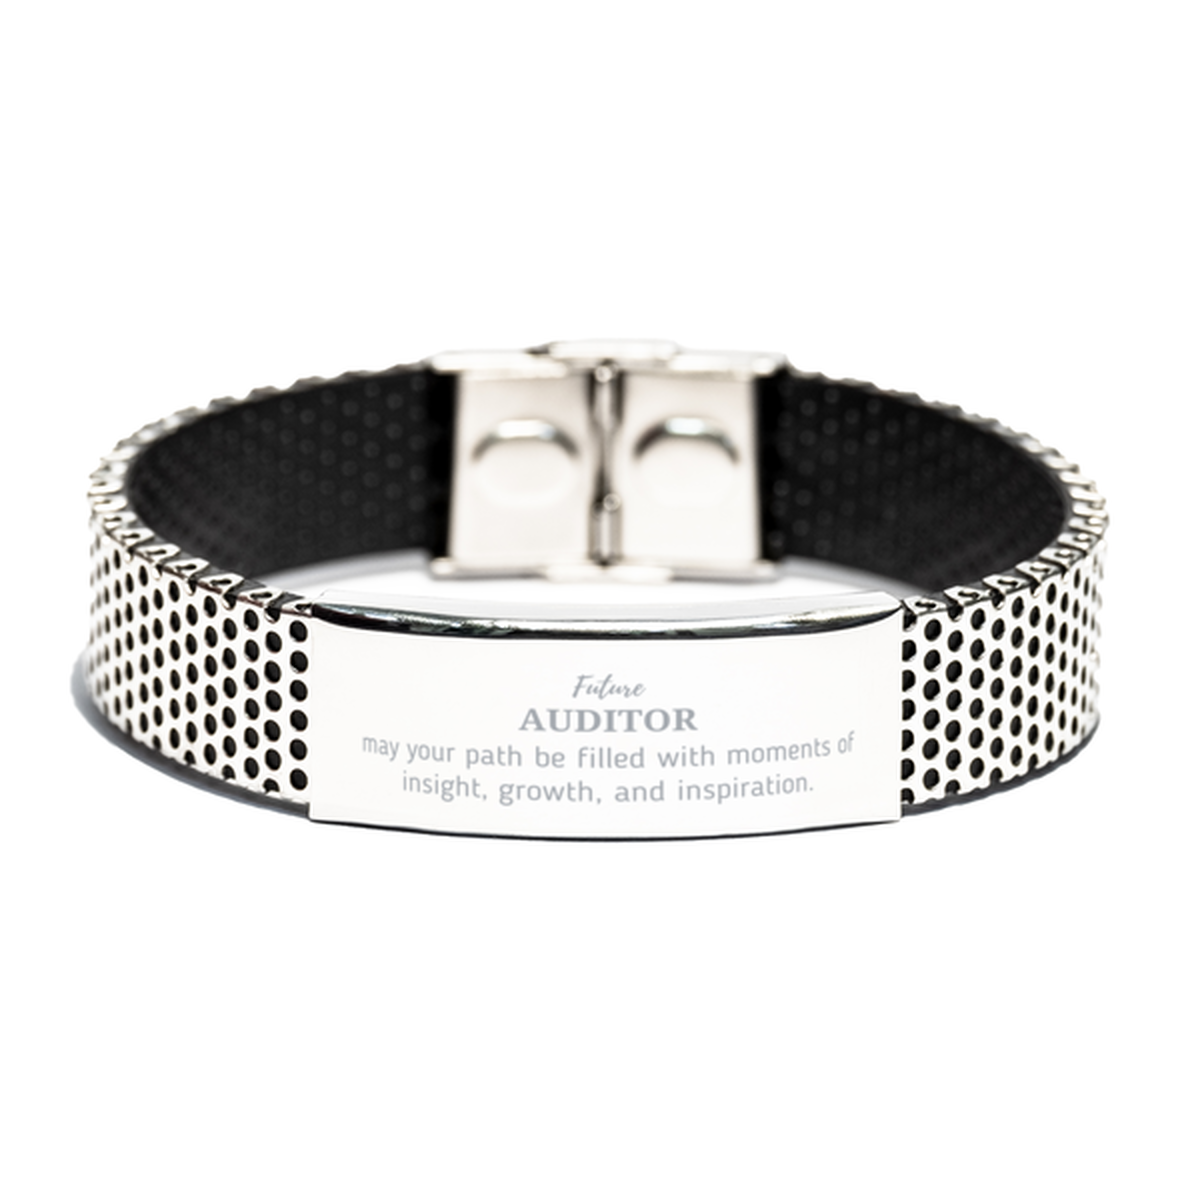 Future Auditor Gifts, May your path be filled with moments of insight, Graduation Gifts for New Auditor, Christmas Unique Stainless Steel Bracelet For Men, Women, Friends